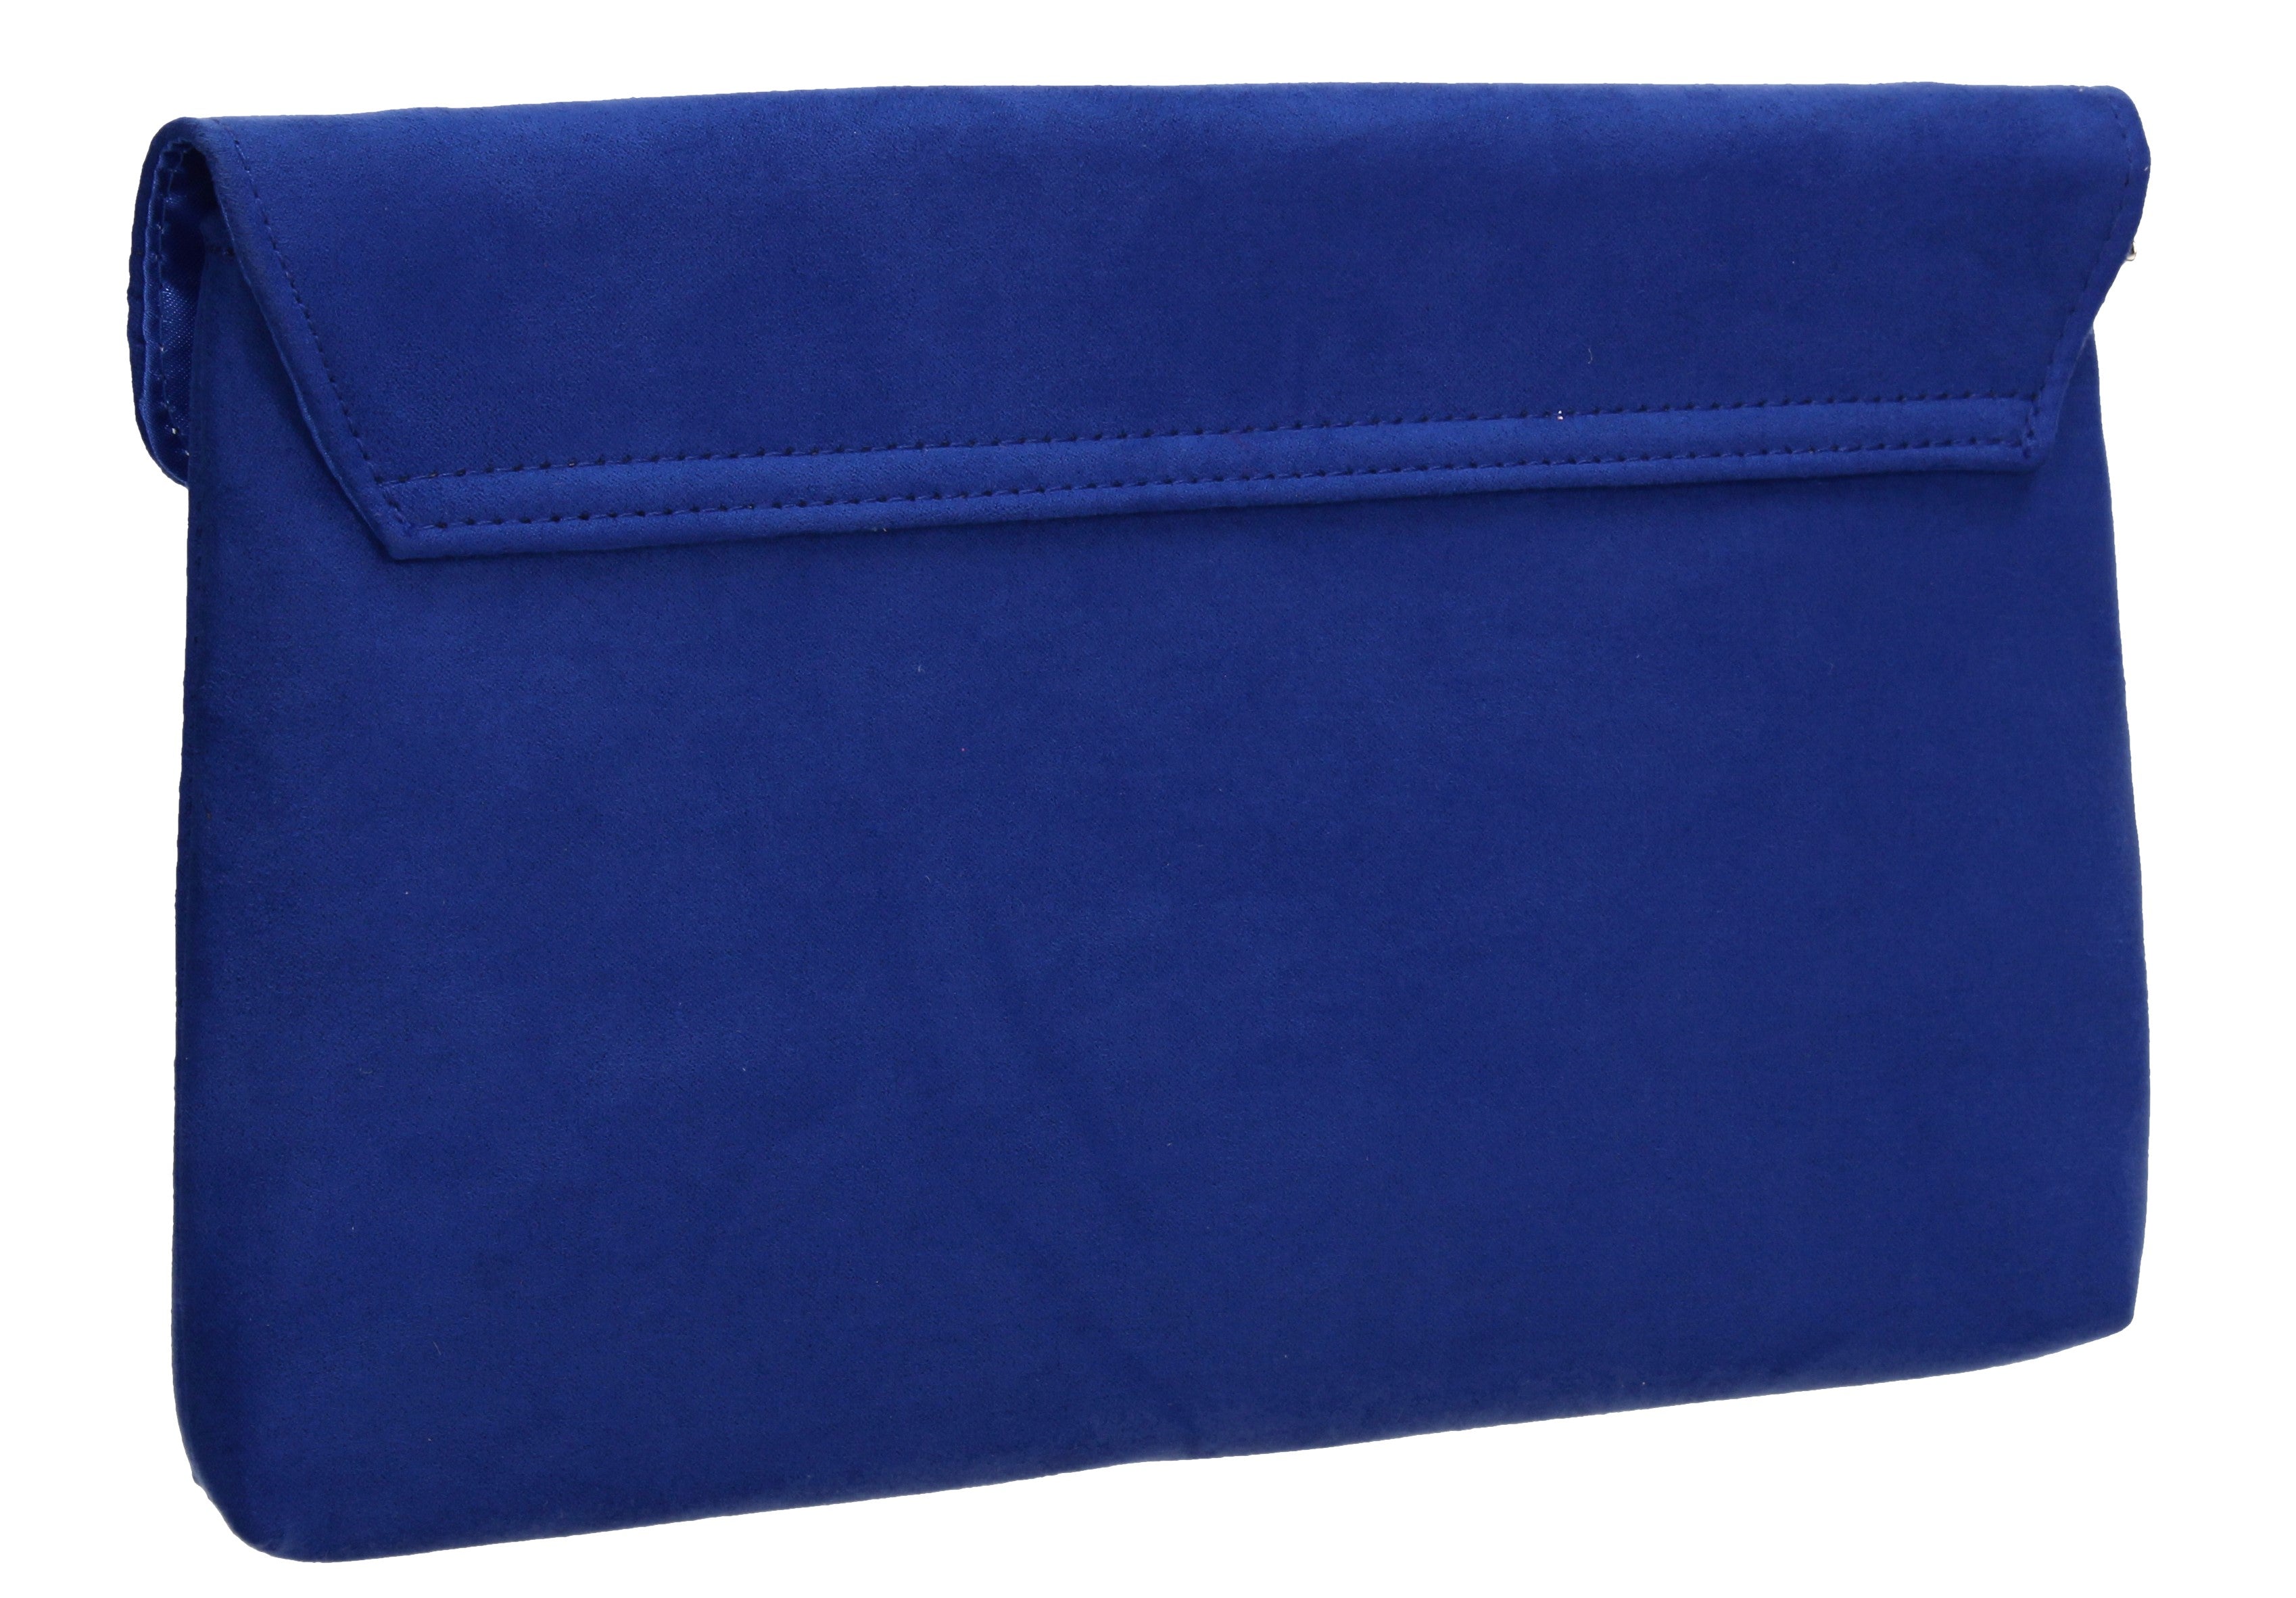 Kate Royal Blue Purse Wallet Cruelty-Free Royal Blue Purse Wallet - Pitti  Vintage Vegan Bags : Pitti Vintage - Handcrafted Vegan Handbags Made in  Italy - Vintage Fashion, Cruelty-free. Shop beautifully made